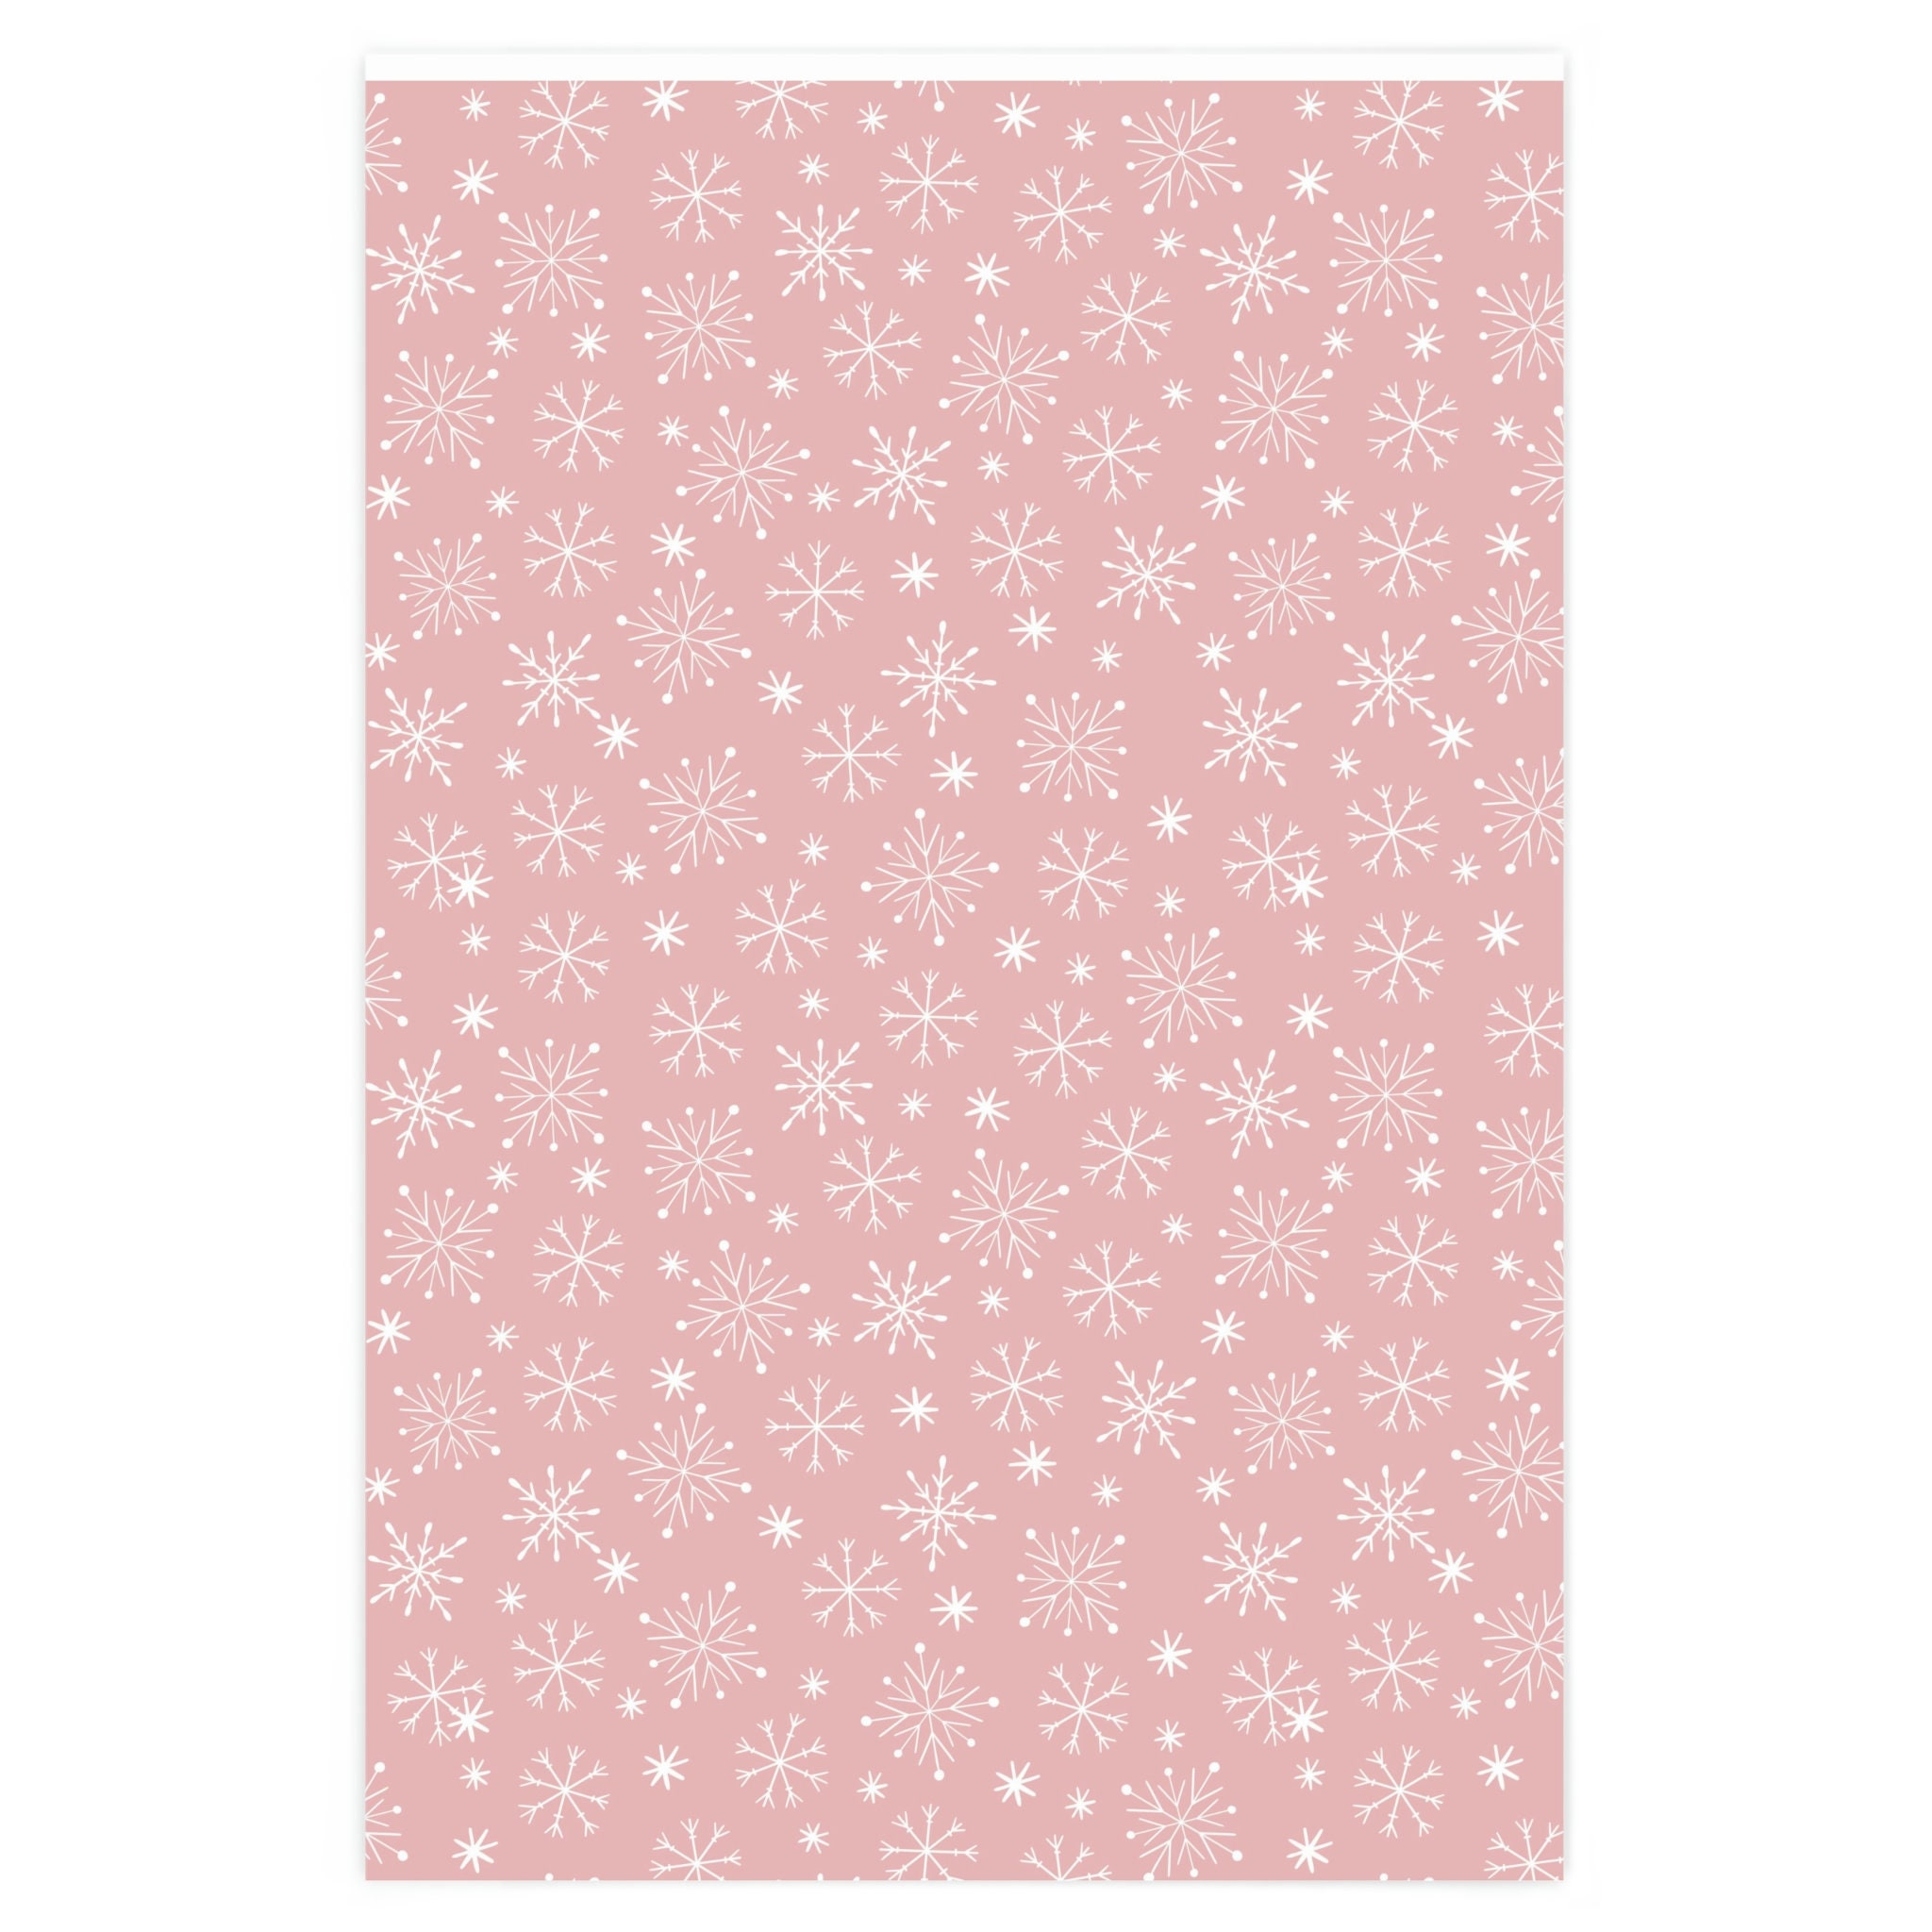 Pink Snowflake Christmas Gift Wrapping Paper Roll 8m